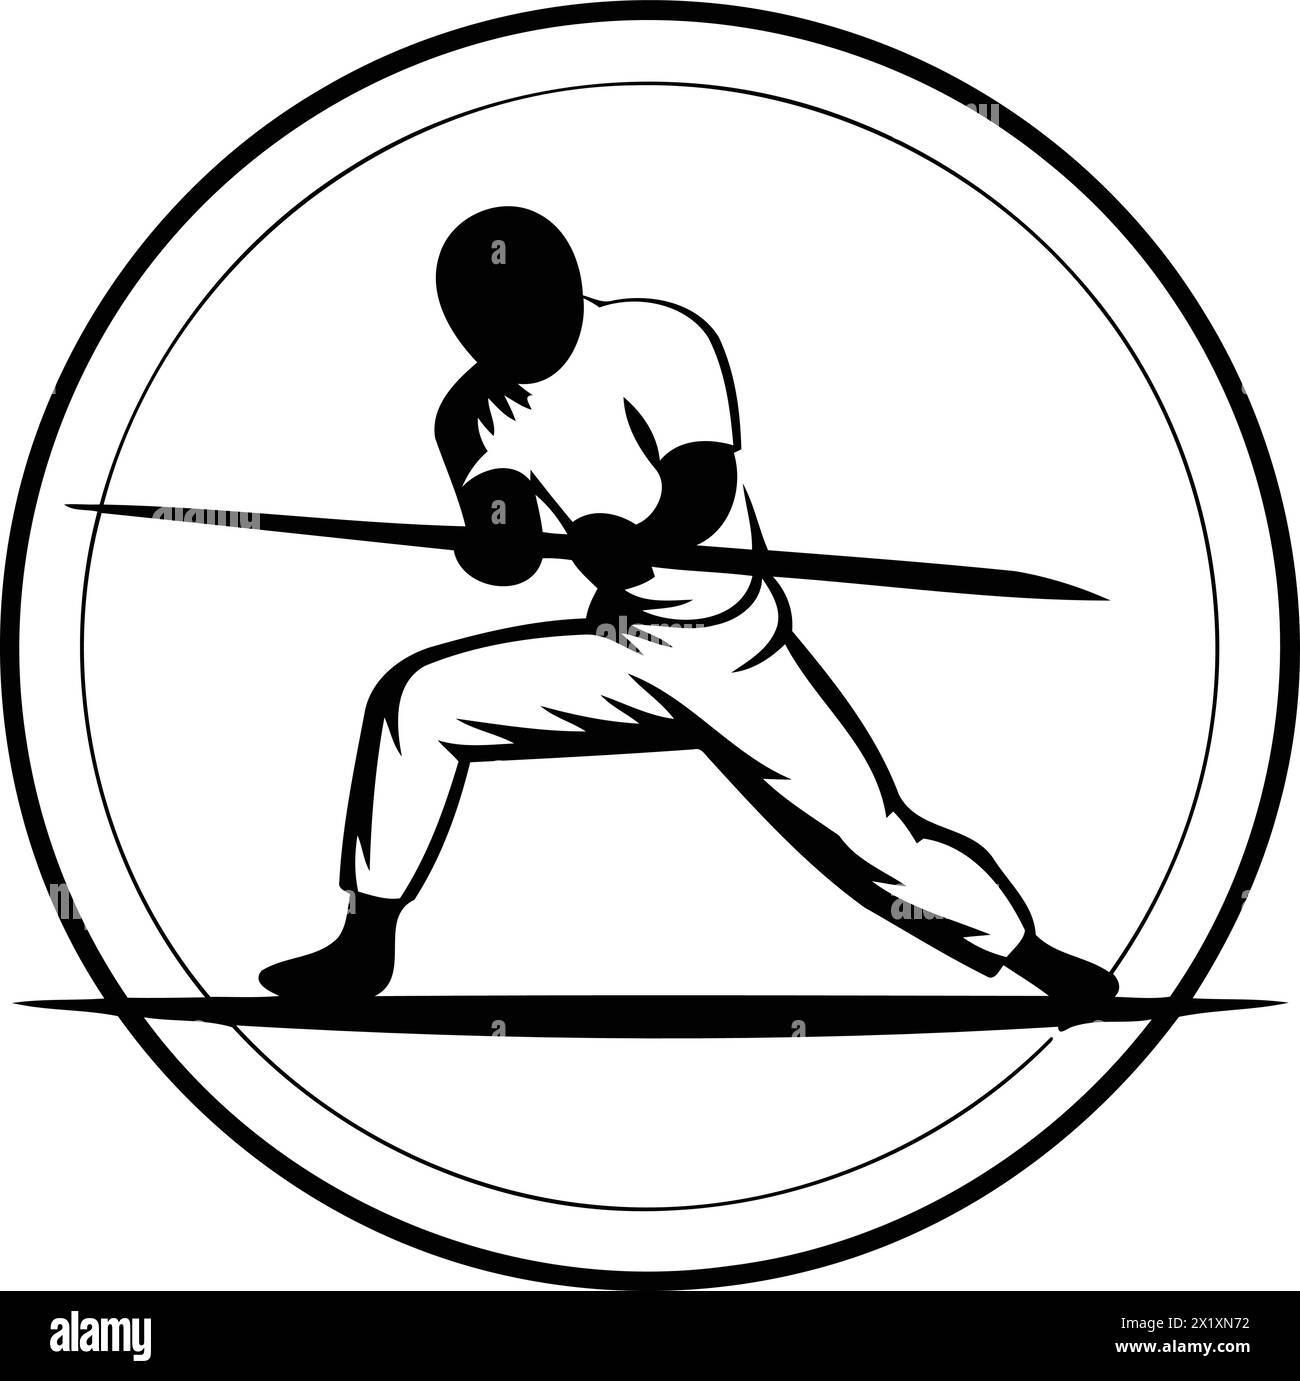 Fencing logo template. Silhouette of a female fencer with a sword Stock Vector